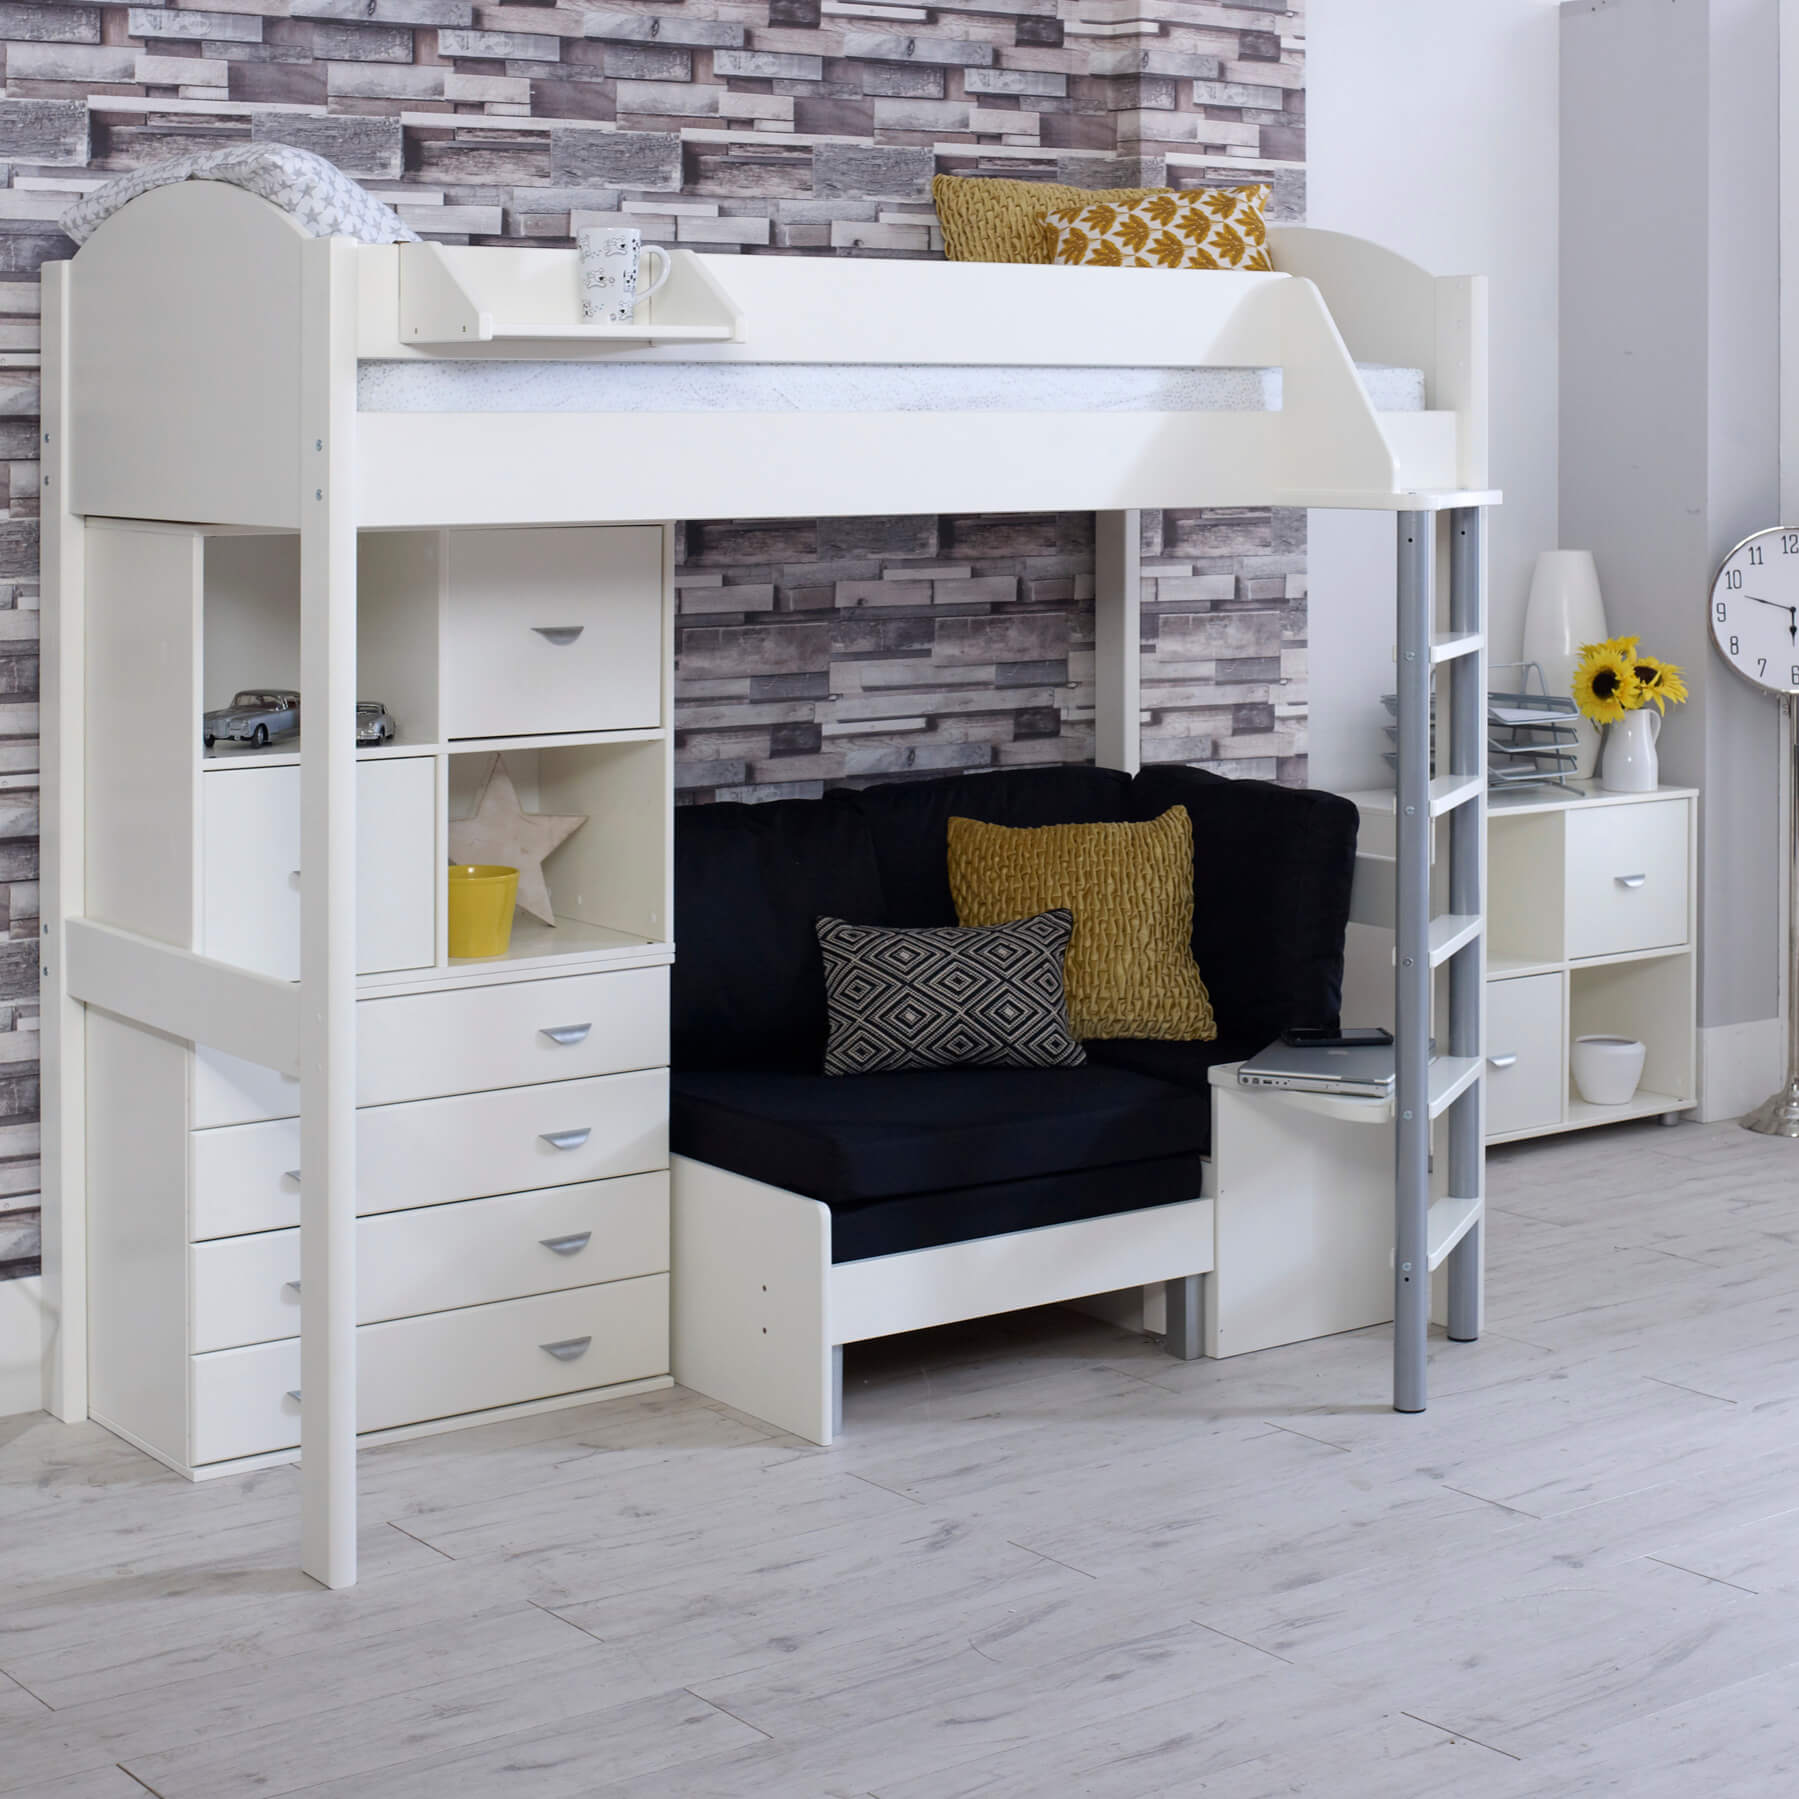 Layla High Sleeper Bed In White With Black Sofa Chair Bed